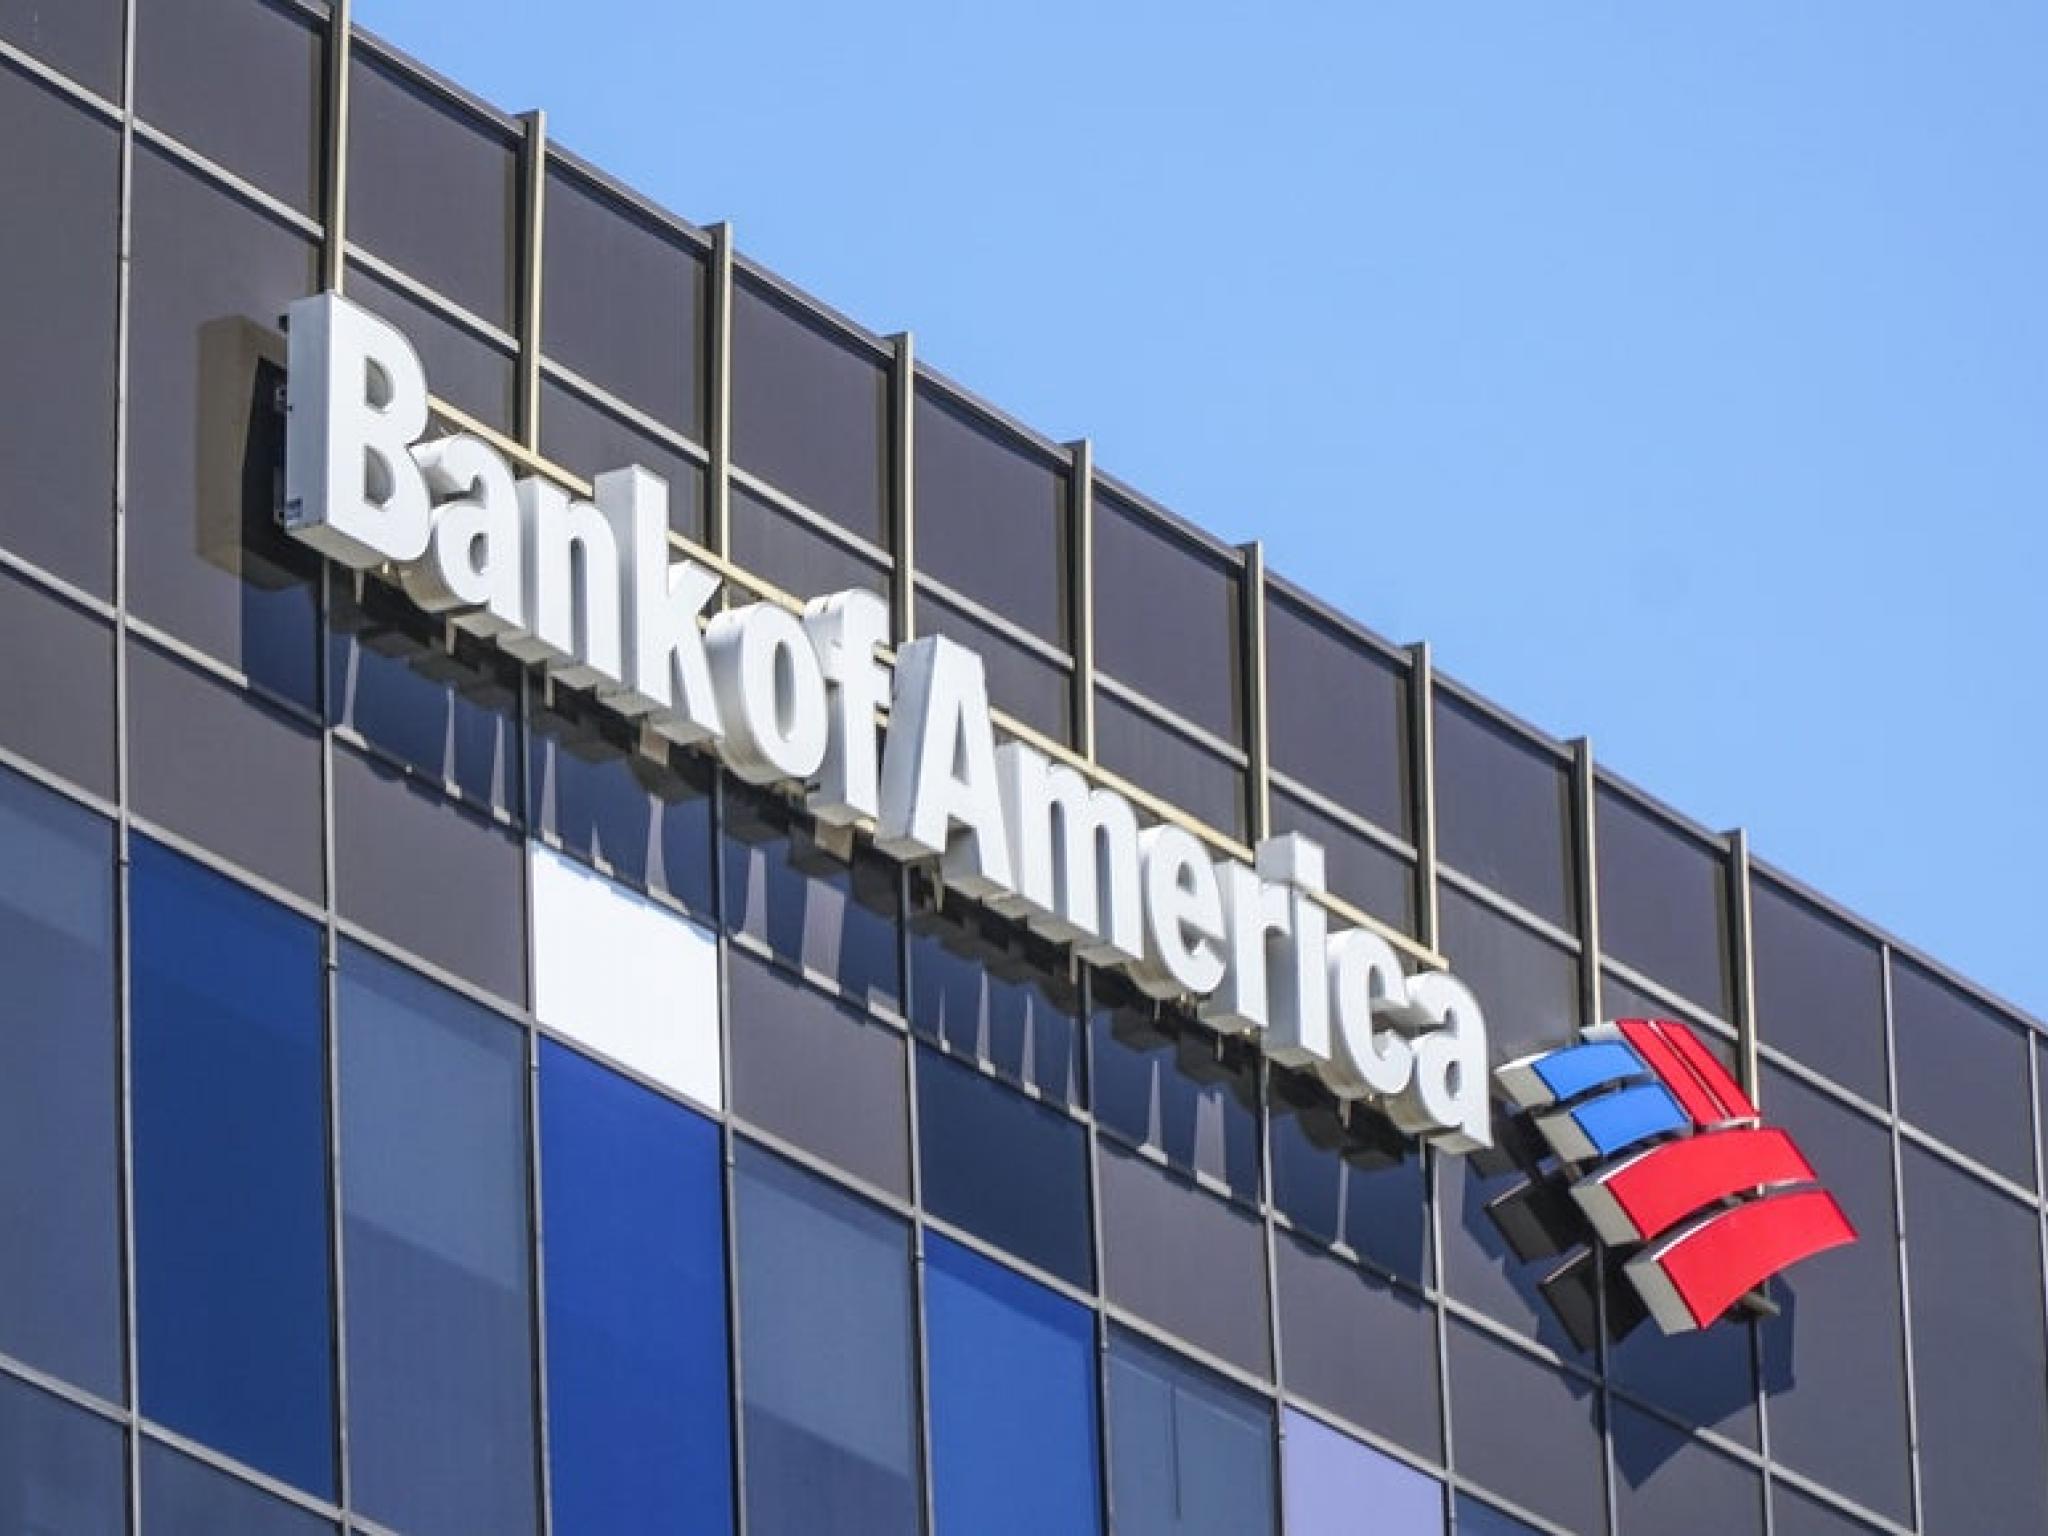  how-to-earn-500-a-month-from-bank-of-america-stock-ahead-of-q2-earnings 